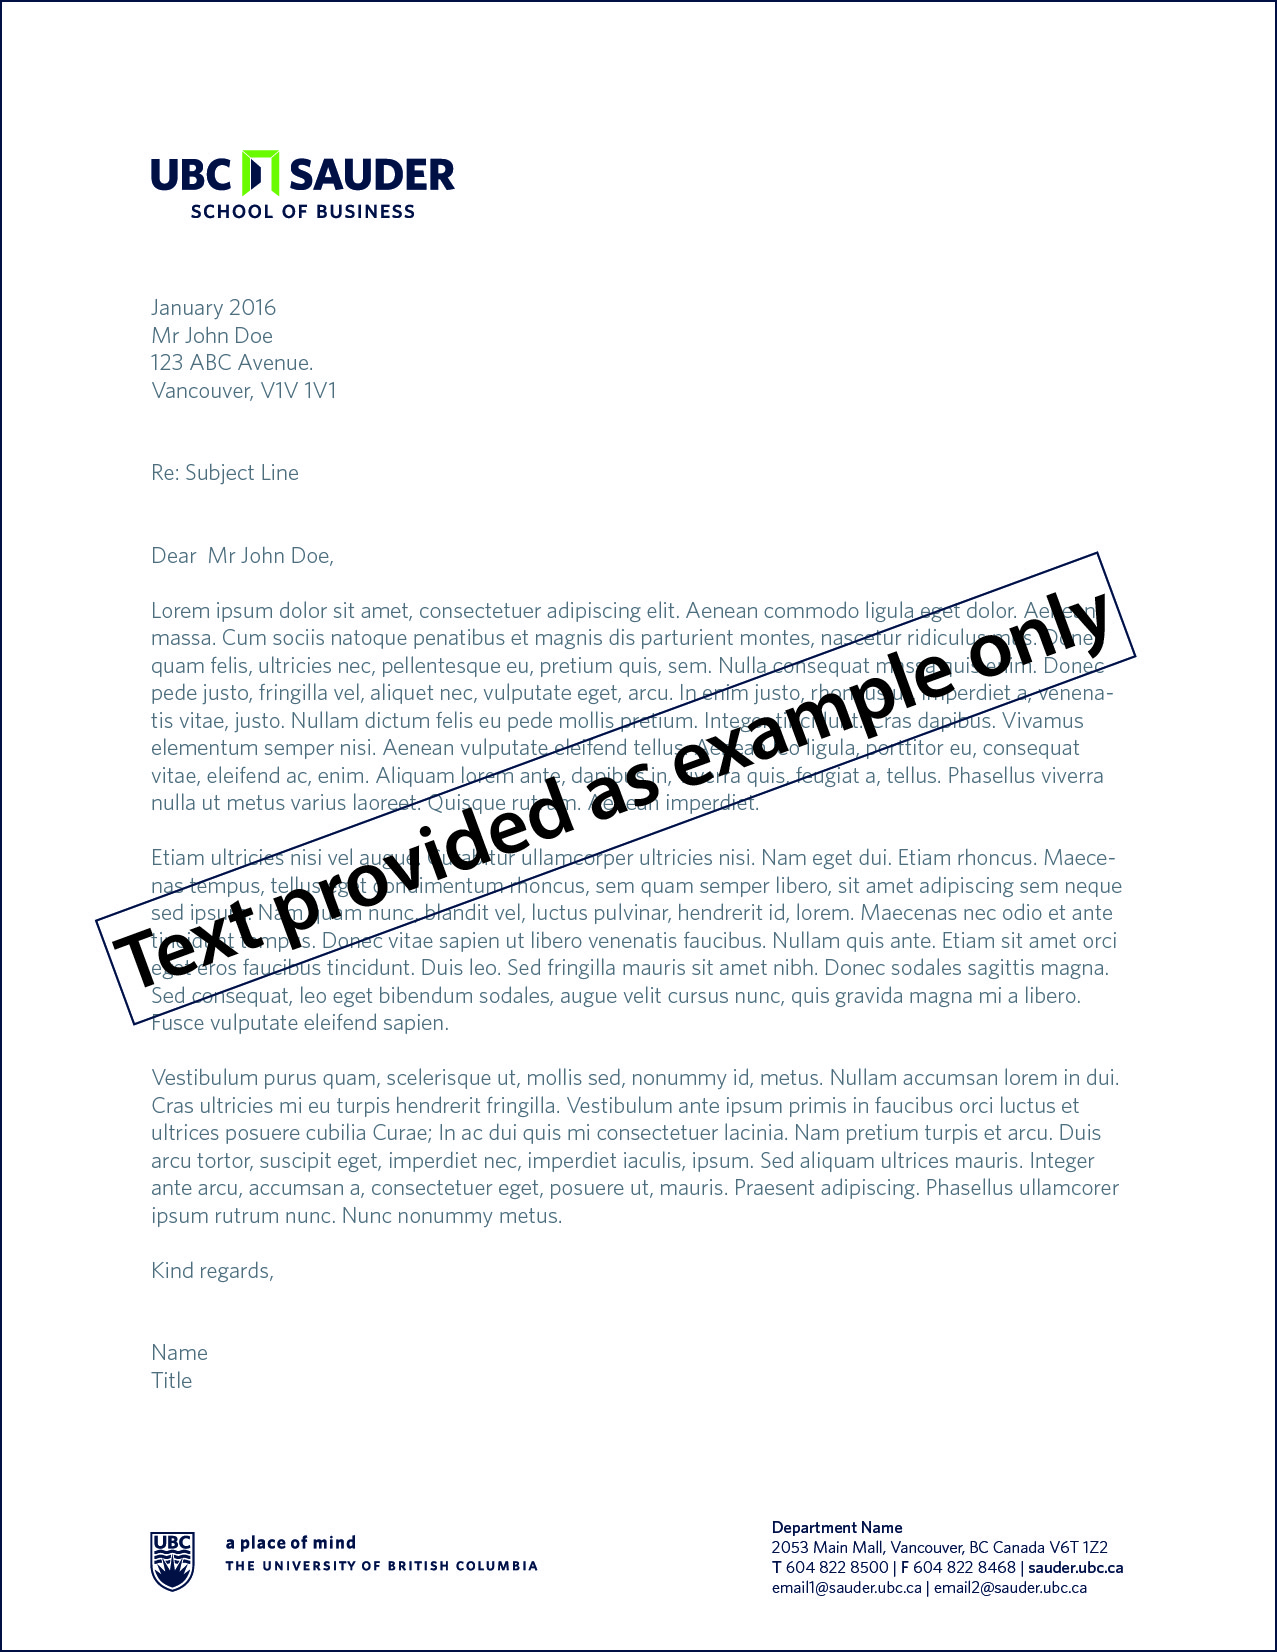 Letterhead example with text